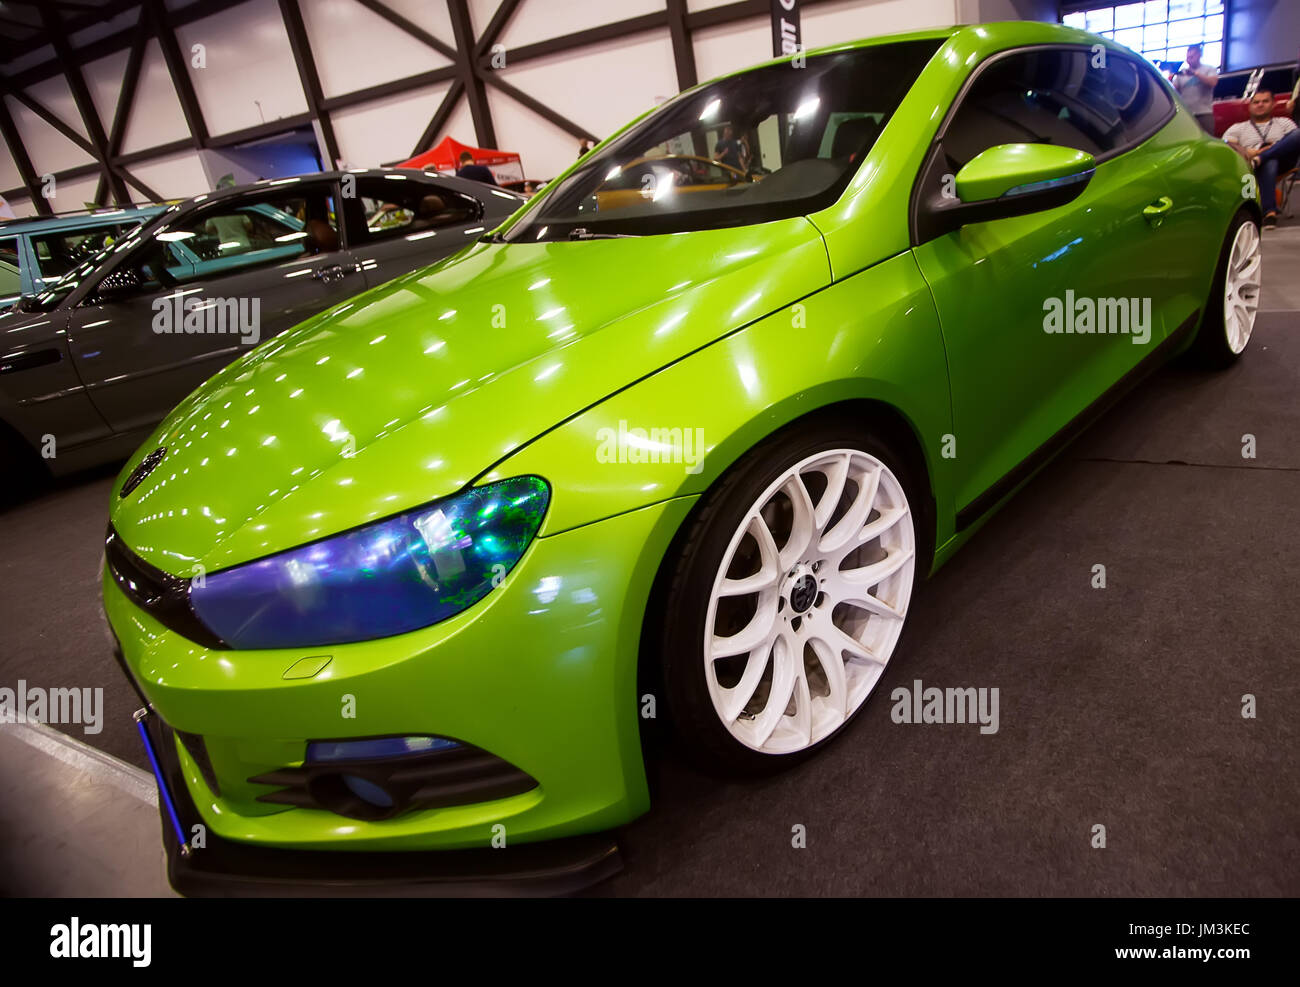 SAINT-PETERSBURG, RUSSIA - JULE 23, 2017: Front view of green car Wolkswagen with sport tuning on Royal Auto Show. Close up of Car hood and white whee Stock Photo